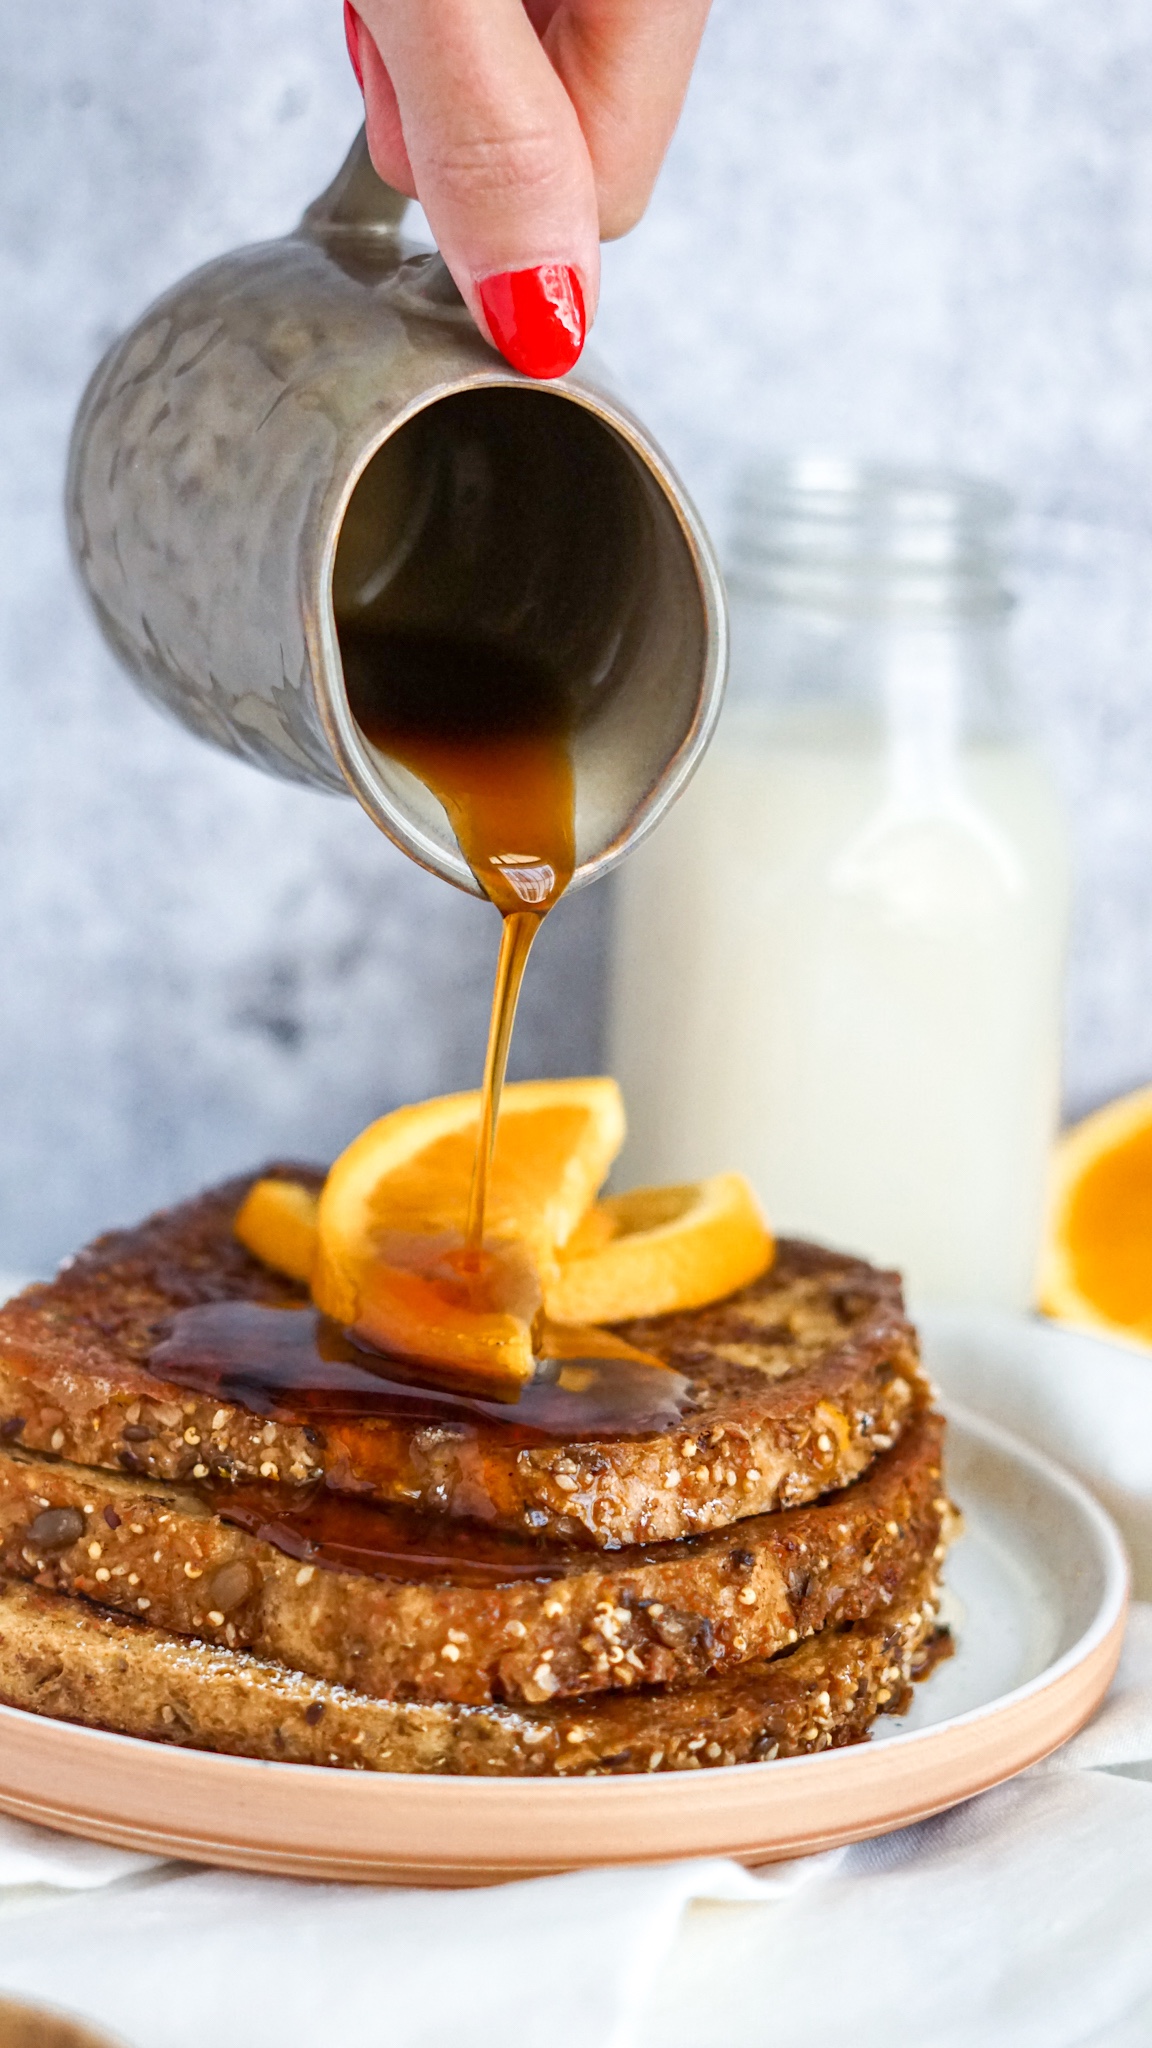 pouring maple syrup on vegan french toast